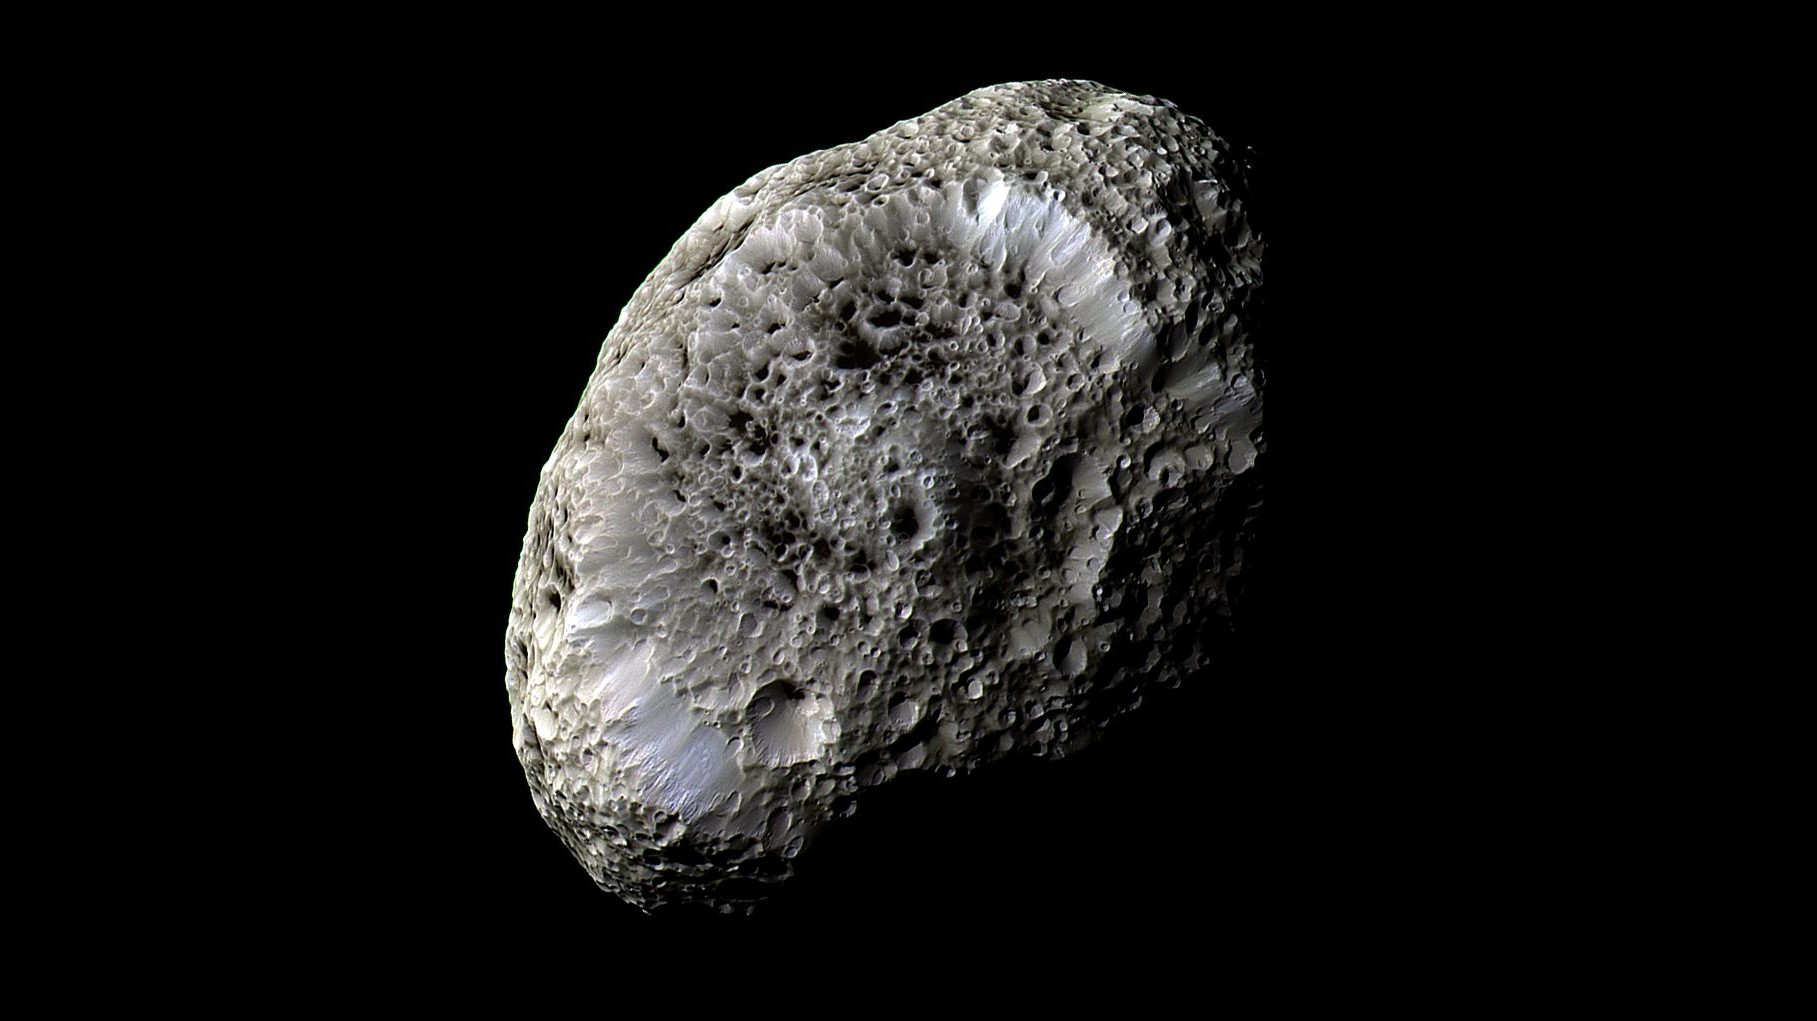 Gray spongey textured moon in the shape of a potato.